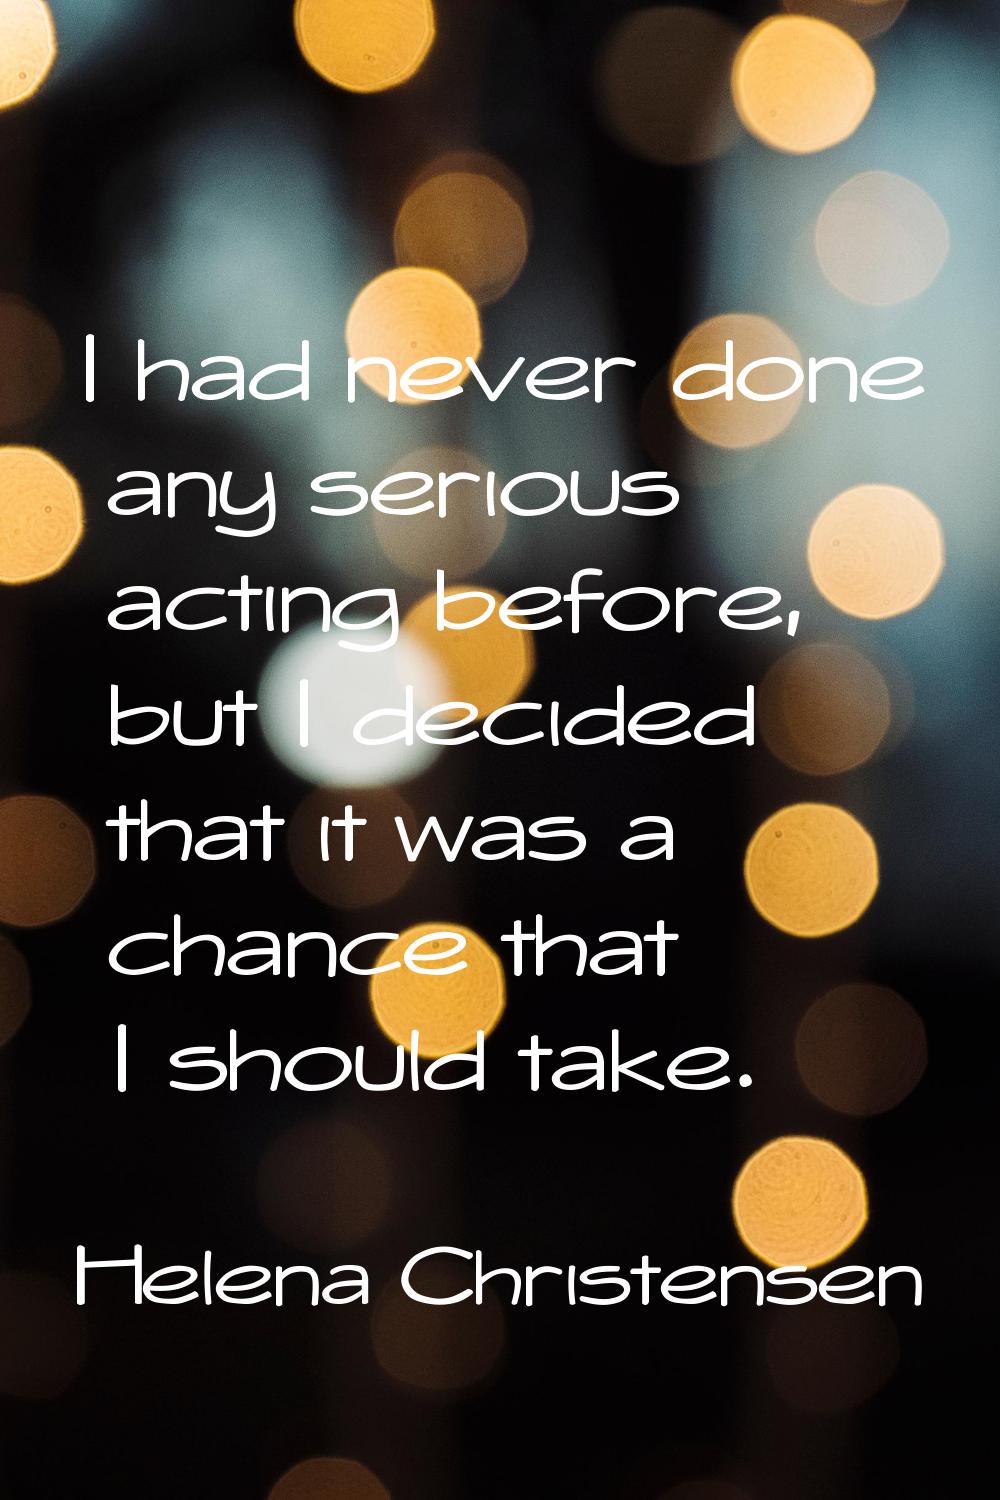 I had never done any serious acting before, but I decided that it was a chance that I should take.